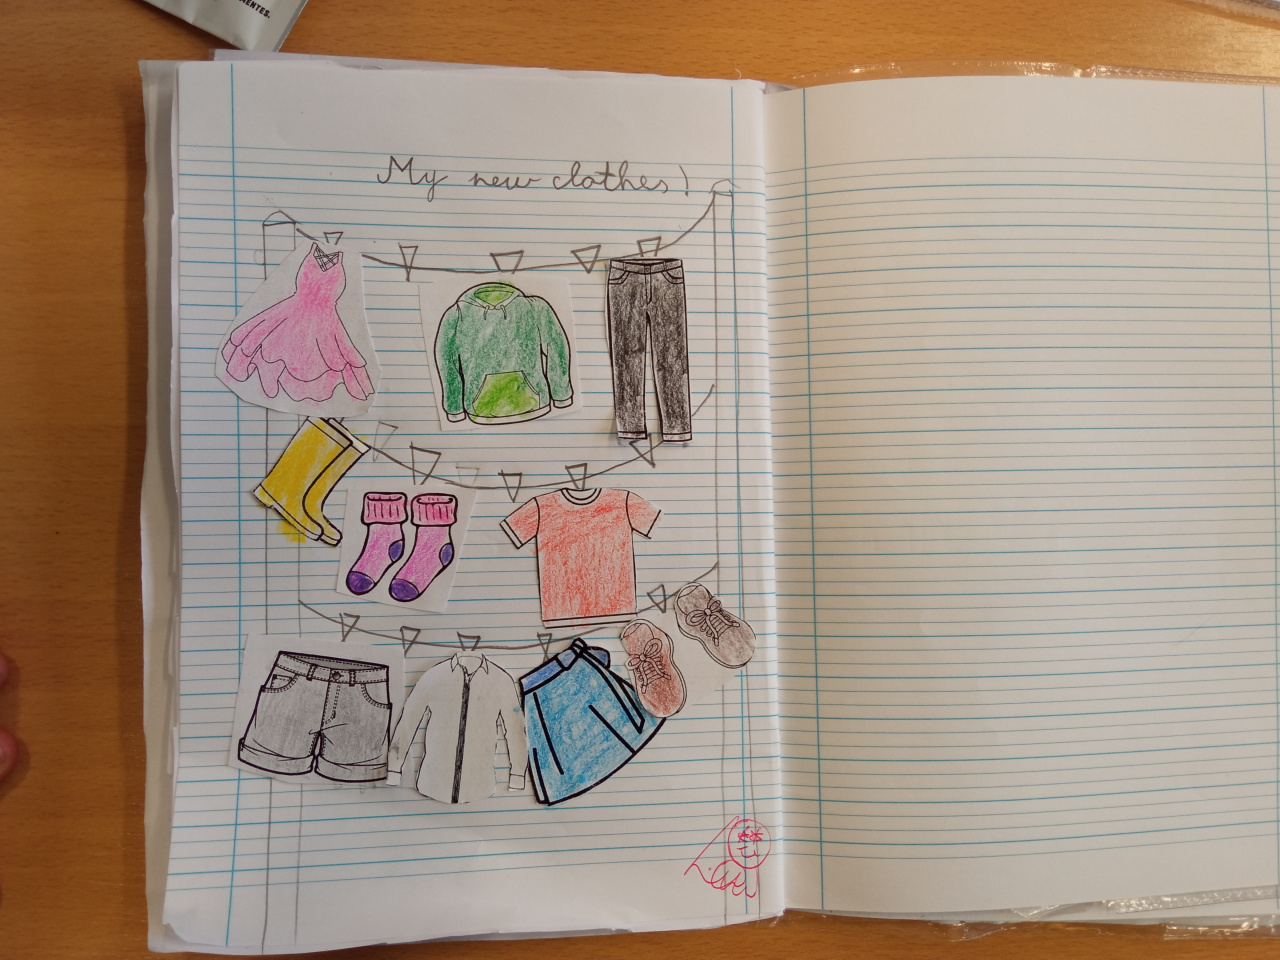 Teaching the names of clothes to second graders